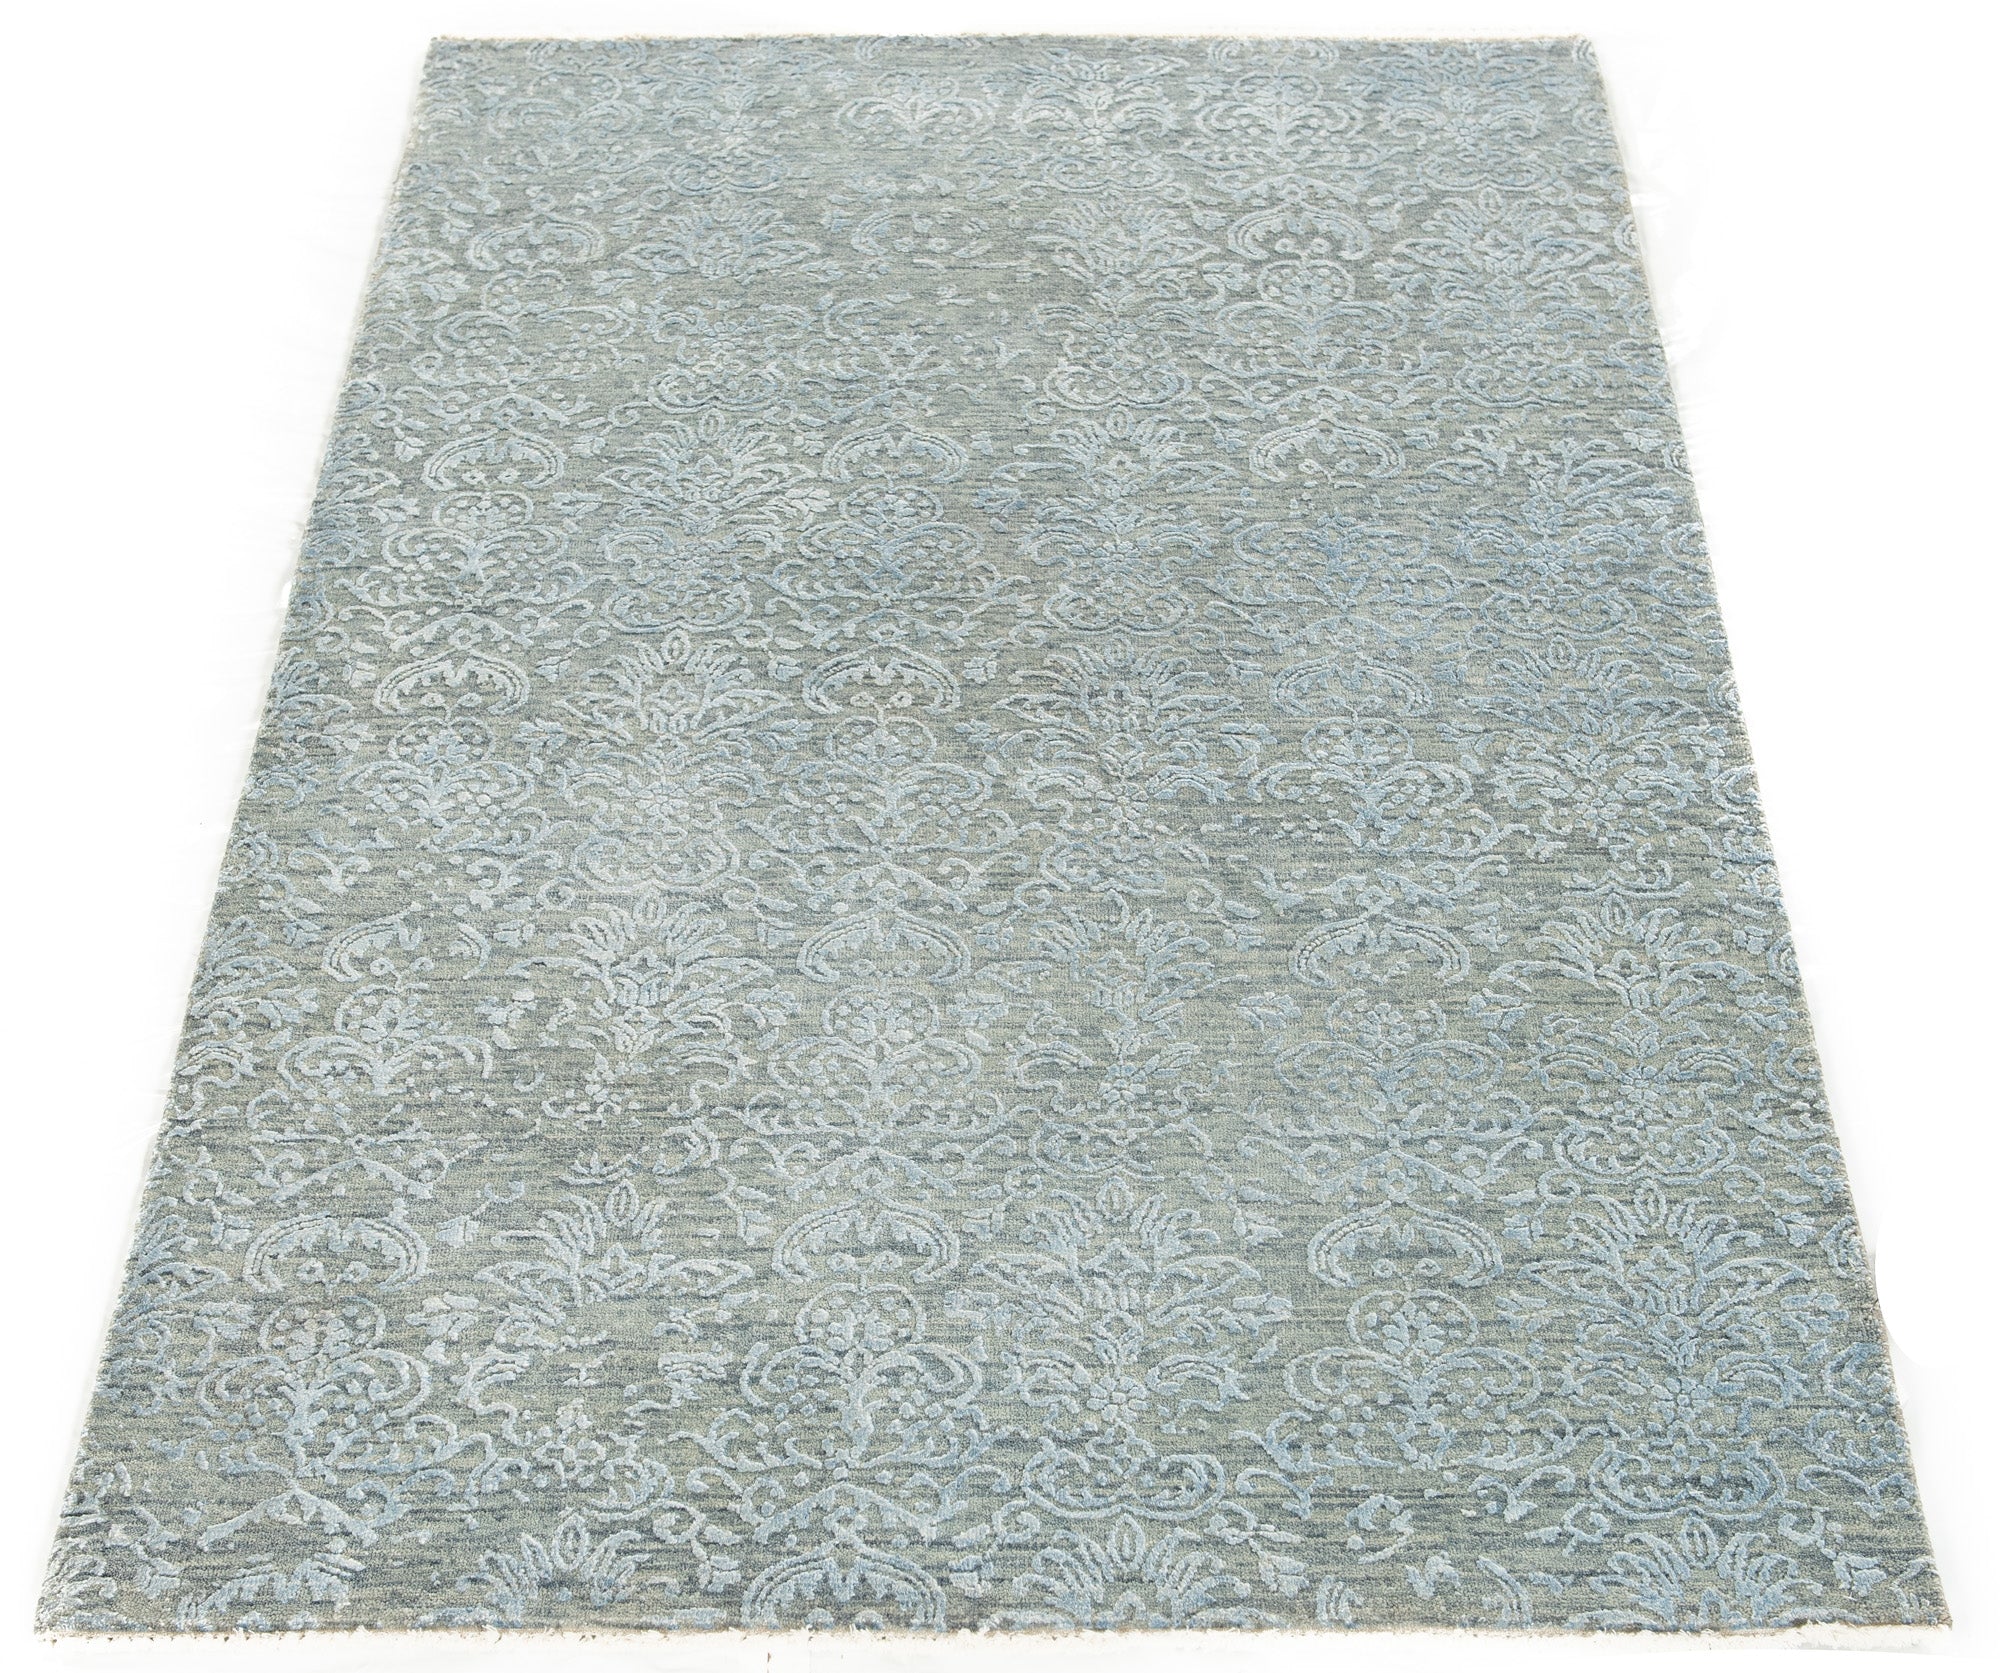 New Indian Contemporary Design Rug <br> 4'0 x 6'2